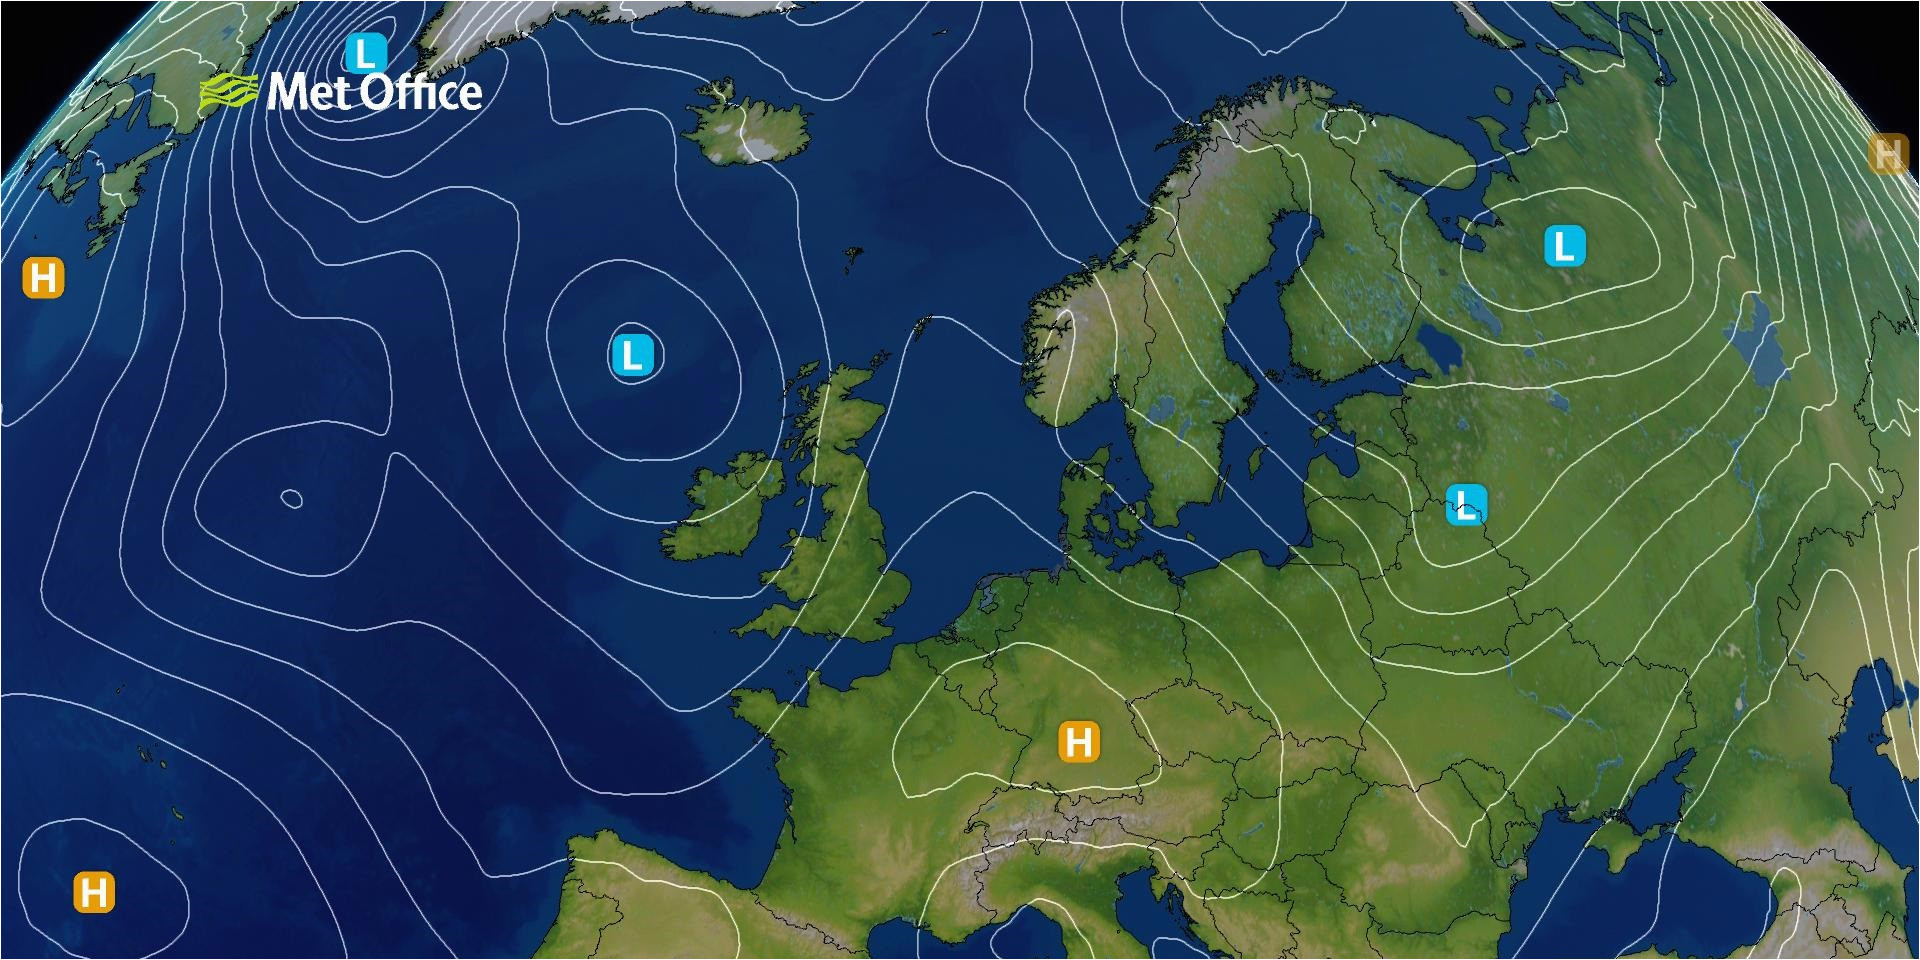 Weather Maps Europe 10 Day Surface Pressure Charts Met Office Of Weather Maps Europe 10 Day 